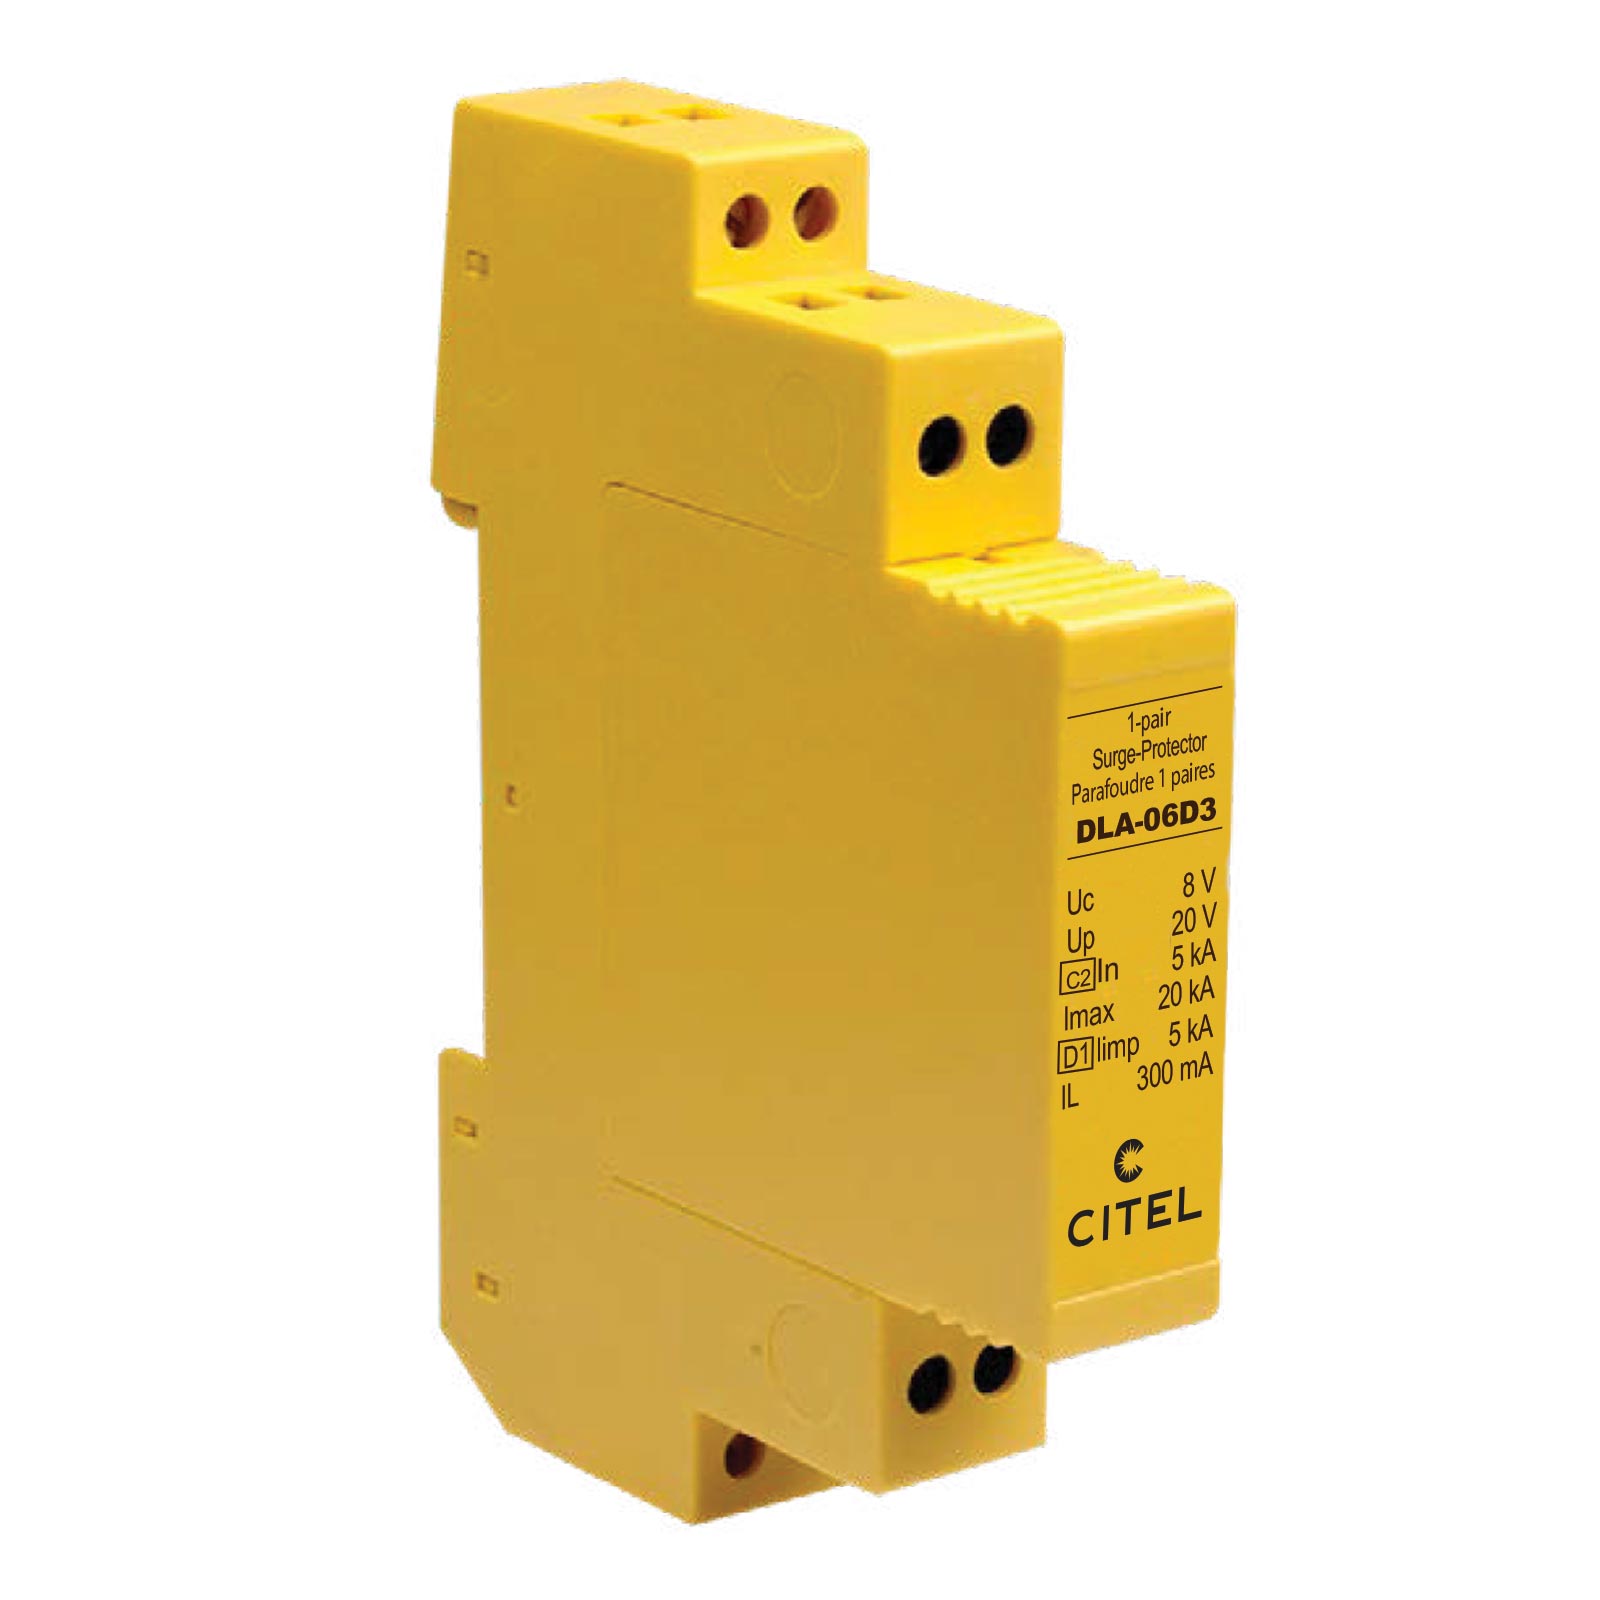 DLA-06D3 1-pair DIN-rail plug-in Data surge protector for RS422